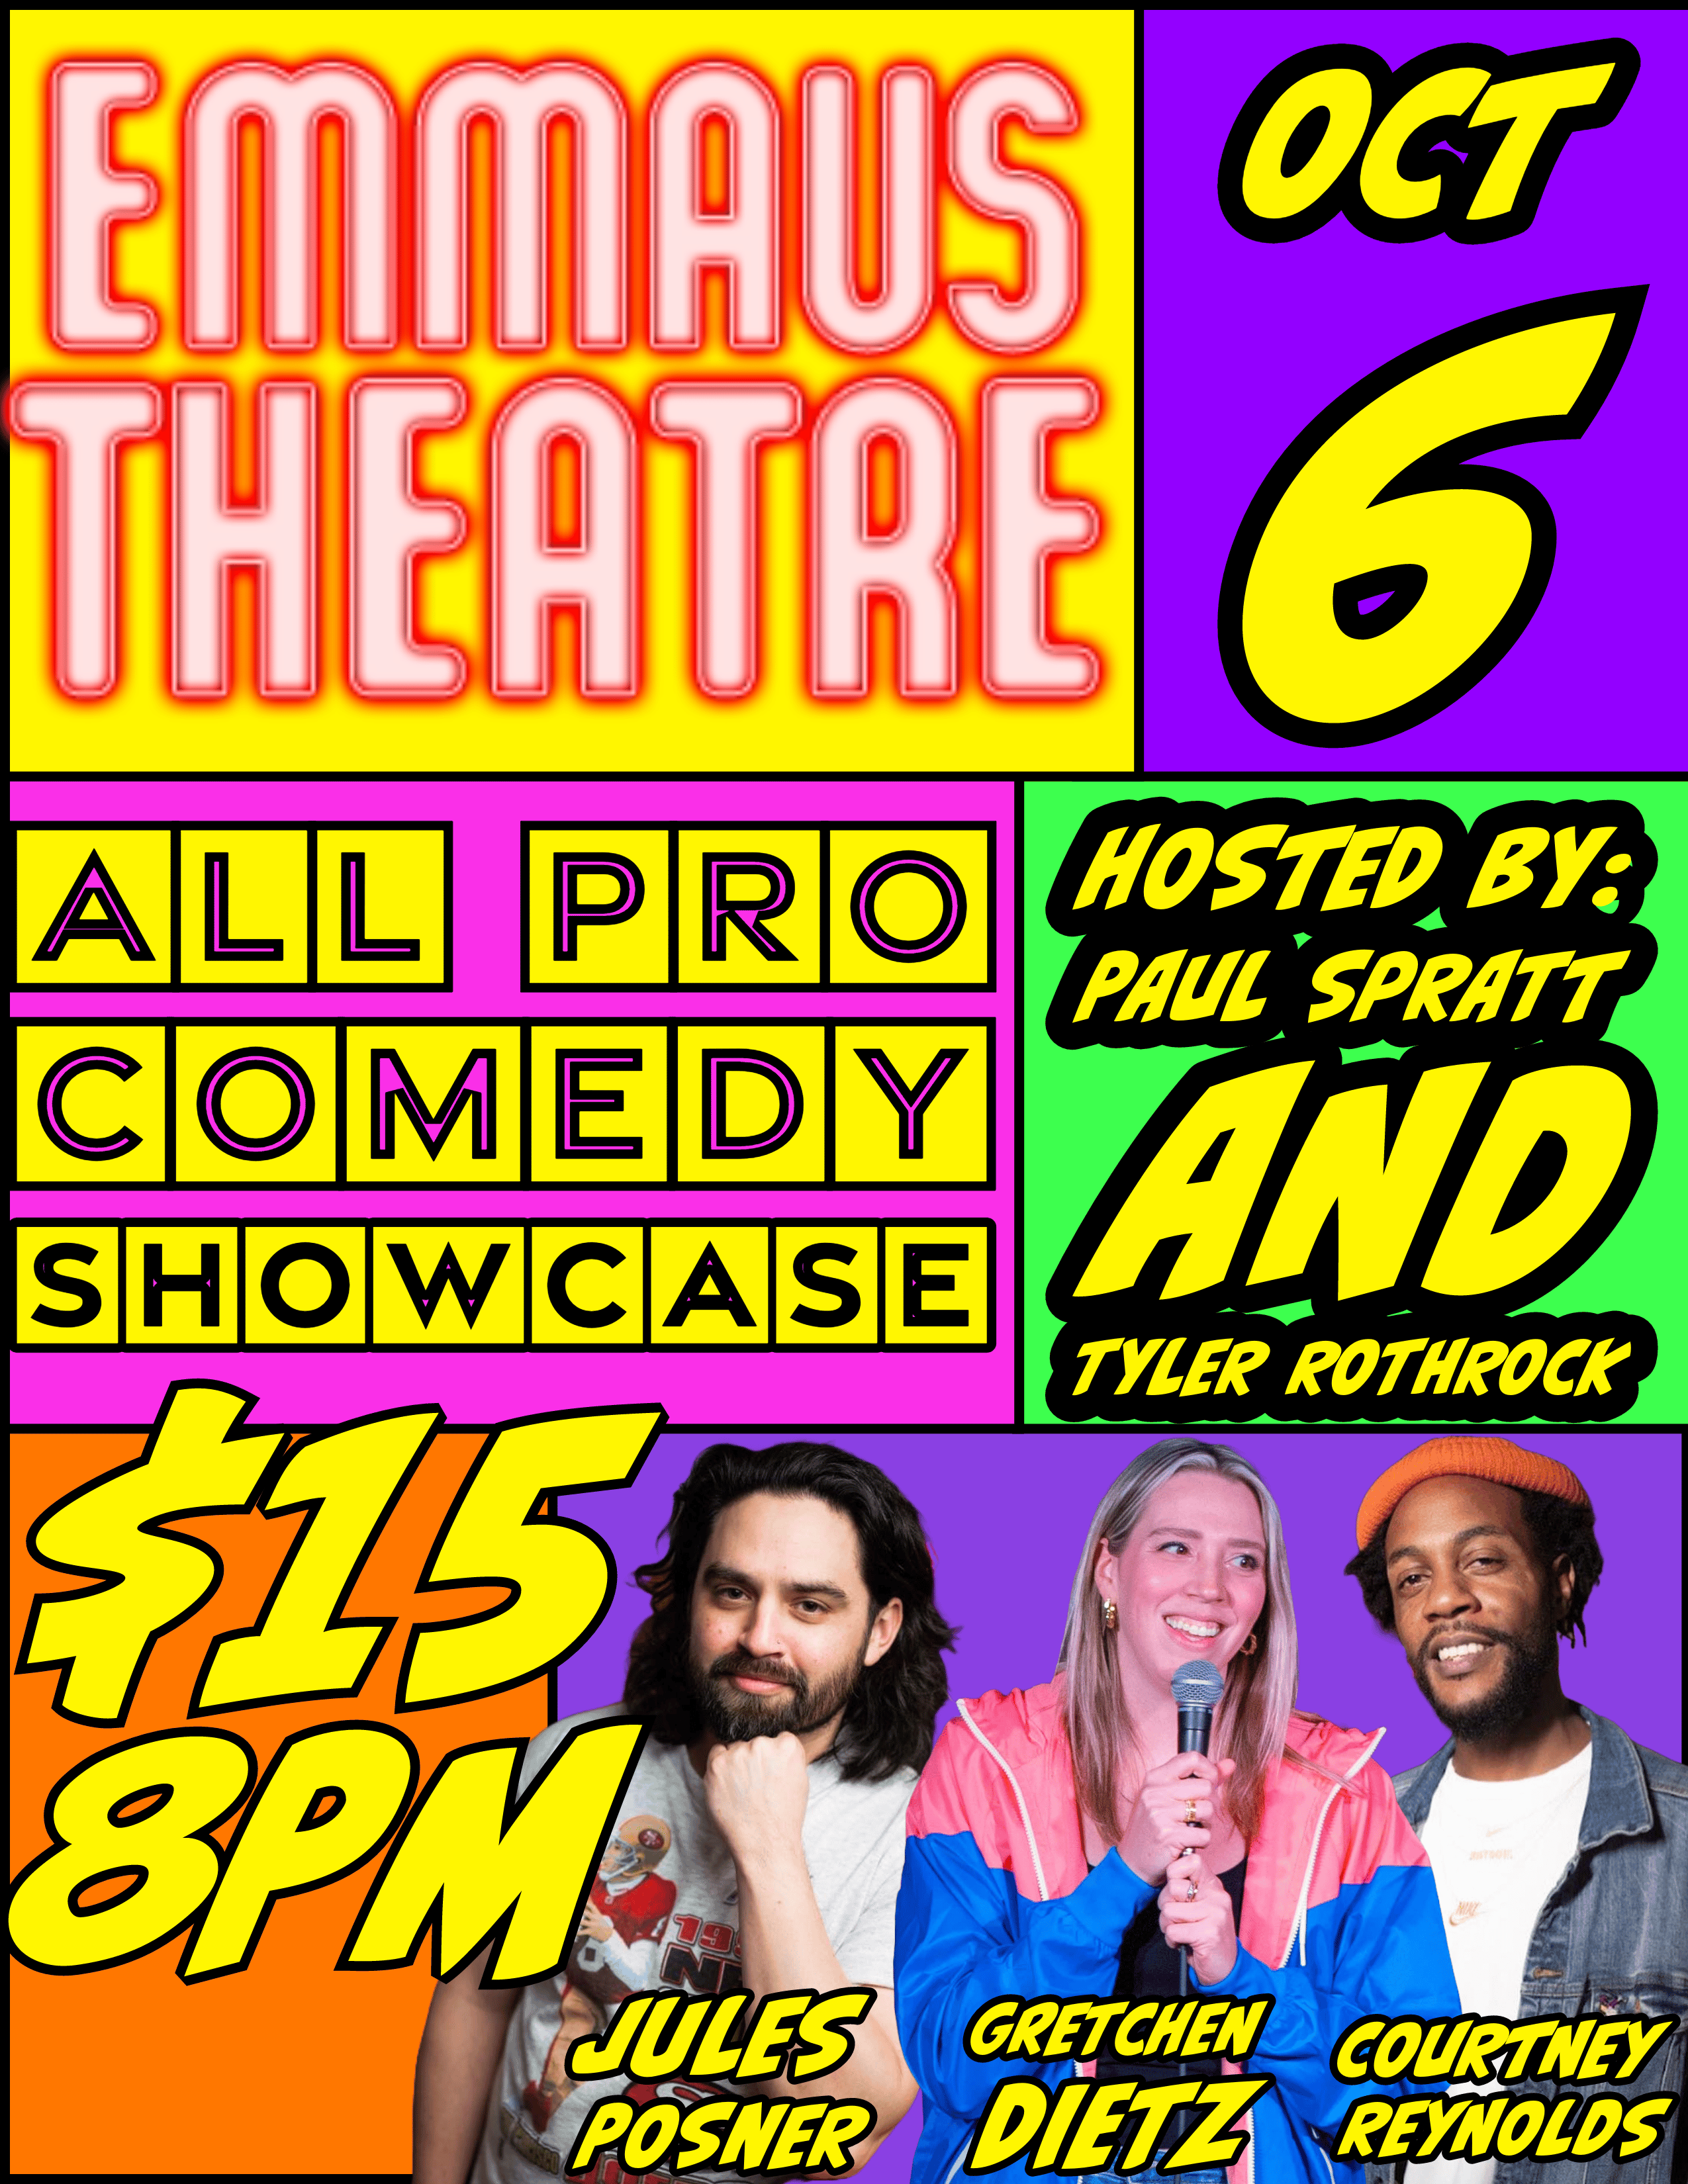 All Pro Stand-Up Comedy Showcase